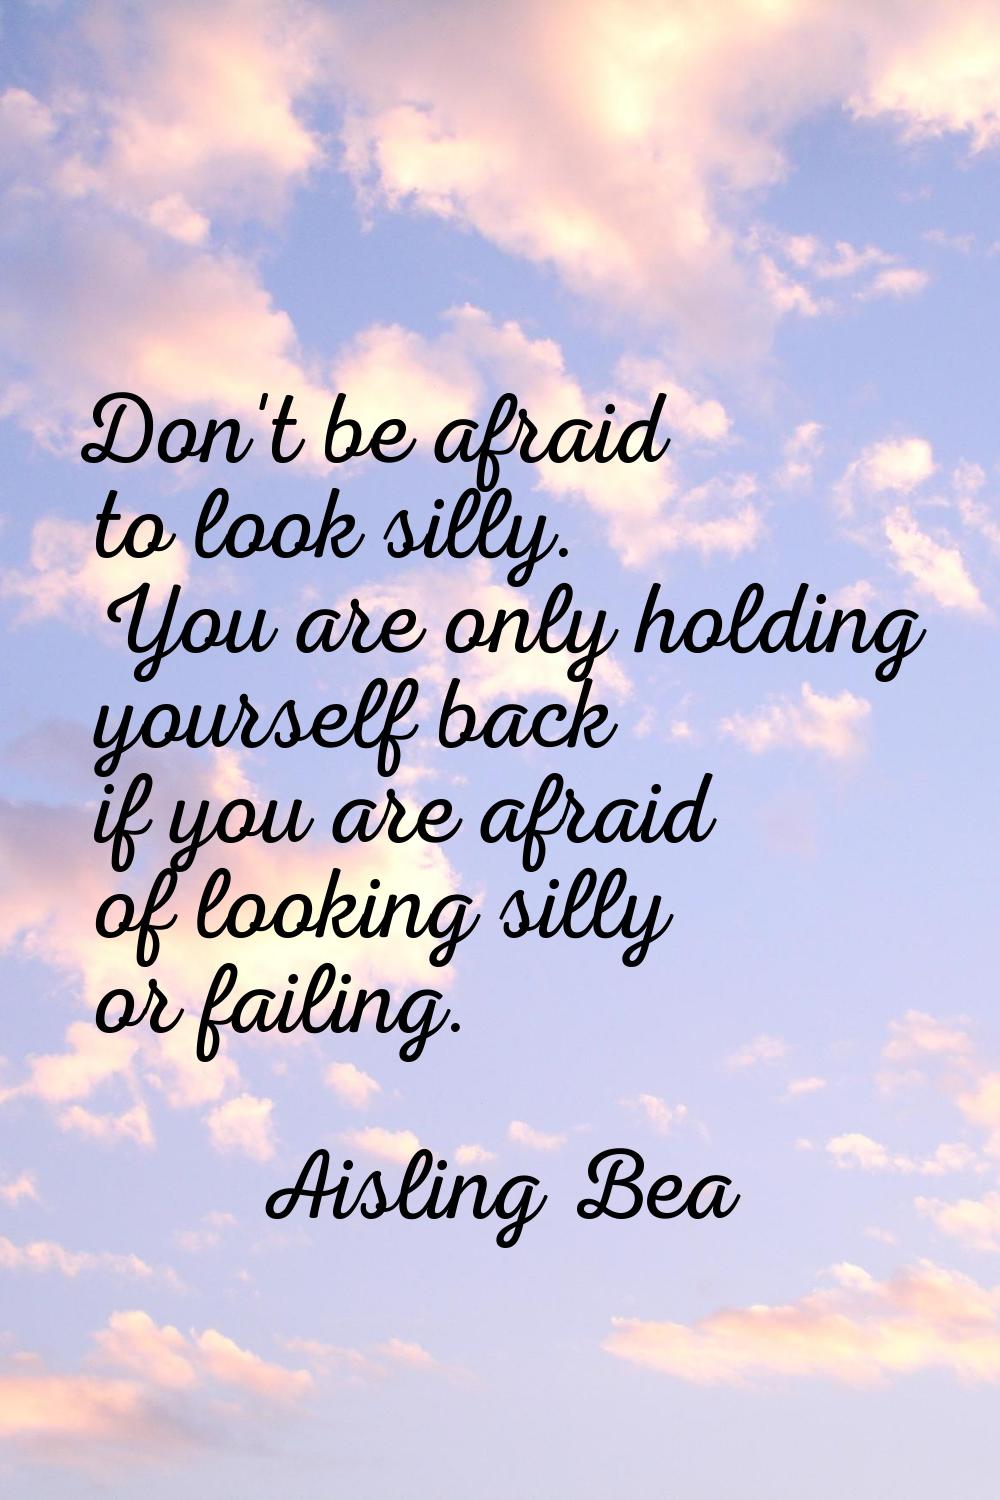 Don't be afraid to look silly. You are only holding yourself back if you are afraid of looking sill